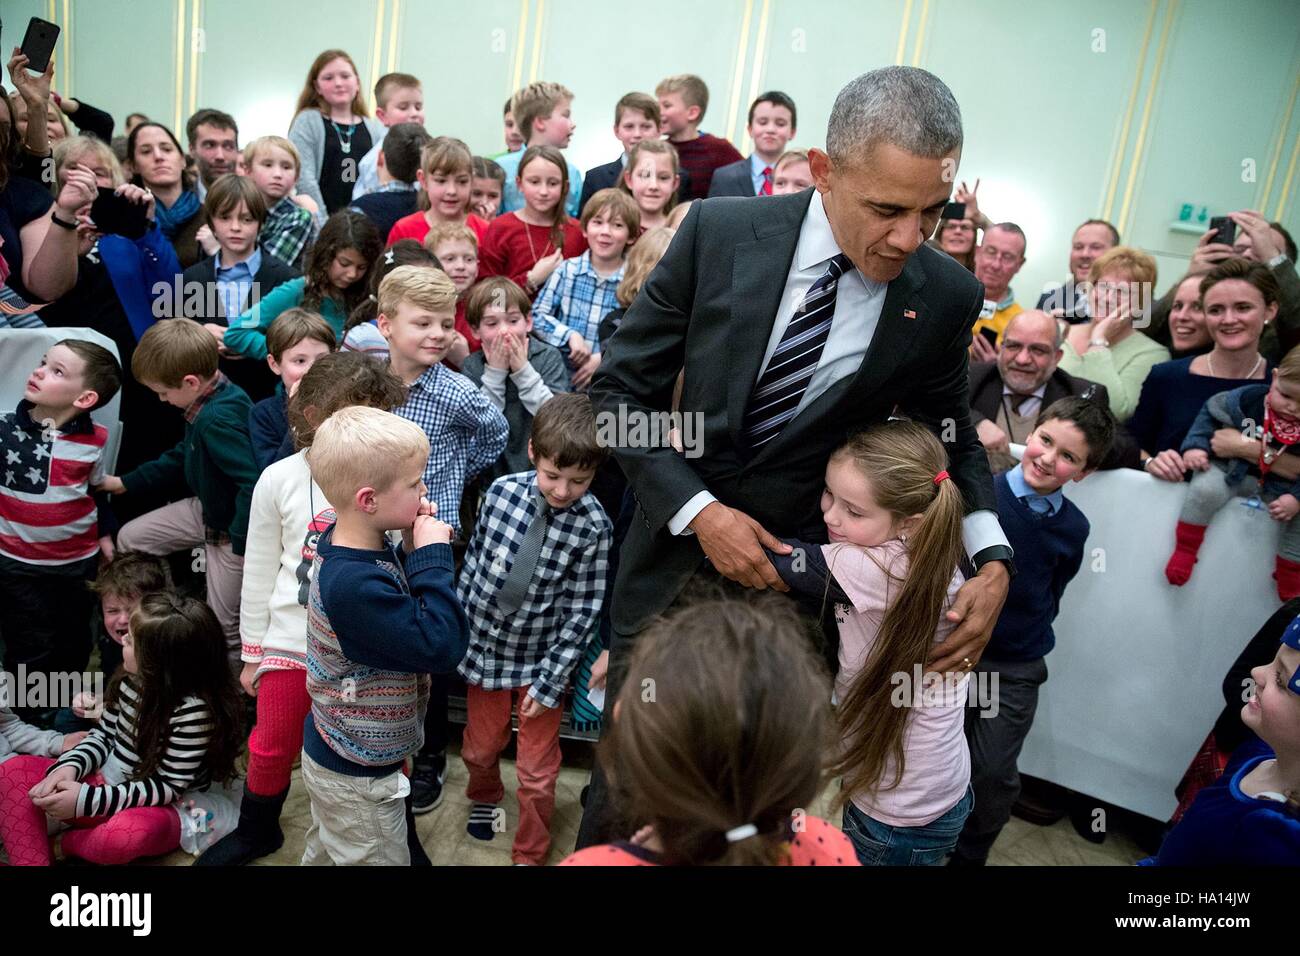 U.S. President Barack Obama greets children during the U.S. Embassy meet and greet at Hotel Adlon November 16, 2016 in Berlin, Germany. Stock Photo